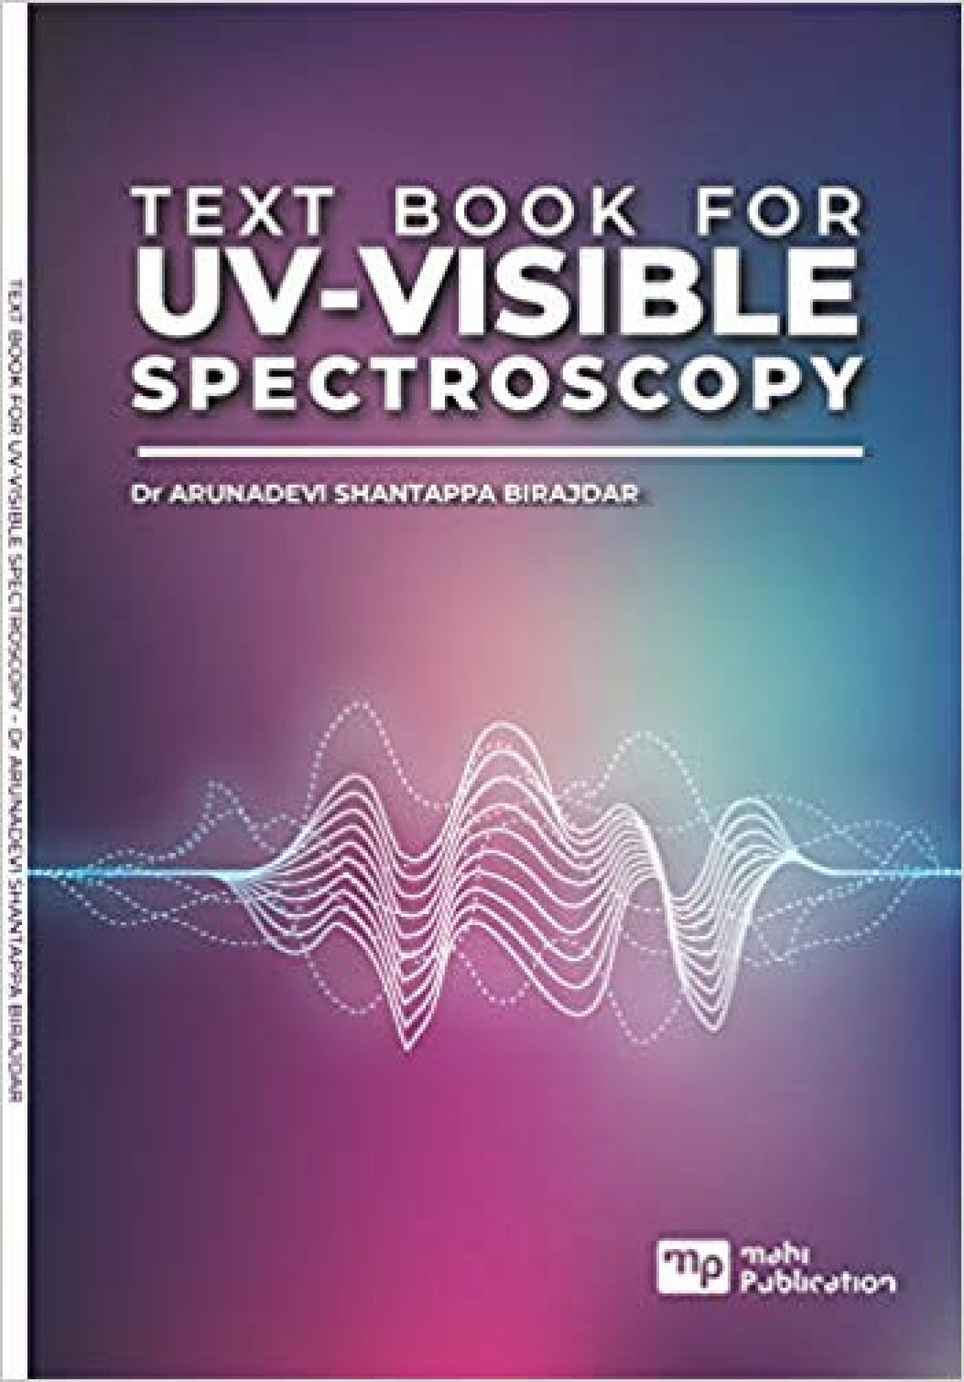 Text Book For Uv-Visible Spectroscopy